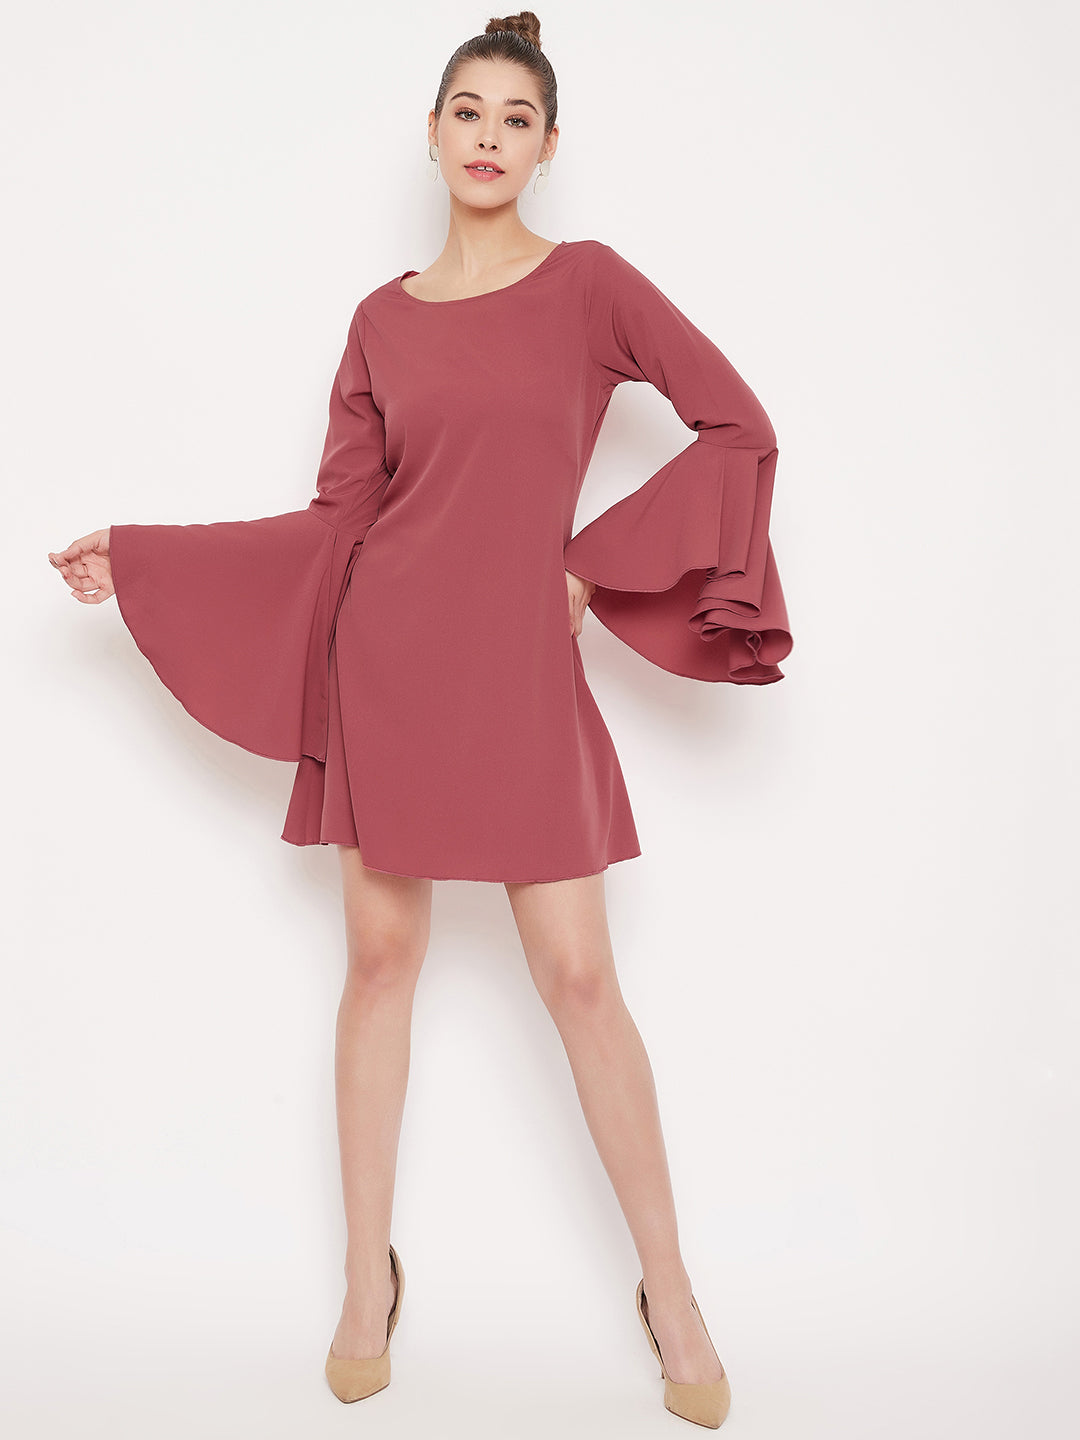 Berrylush Women Solid Dark Pink Round Neck Bell Sleeves Crepe Flared A-Line Mini Dress